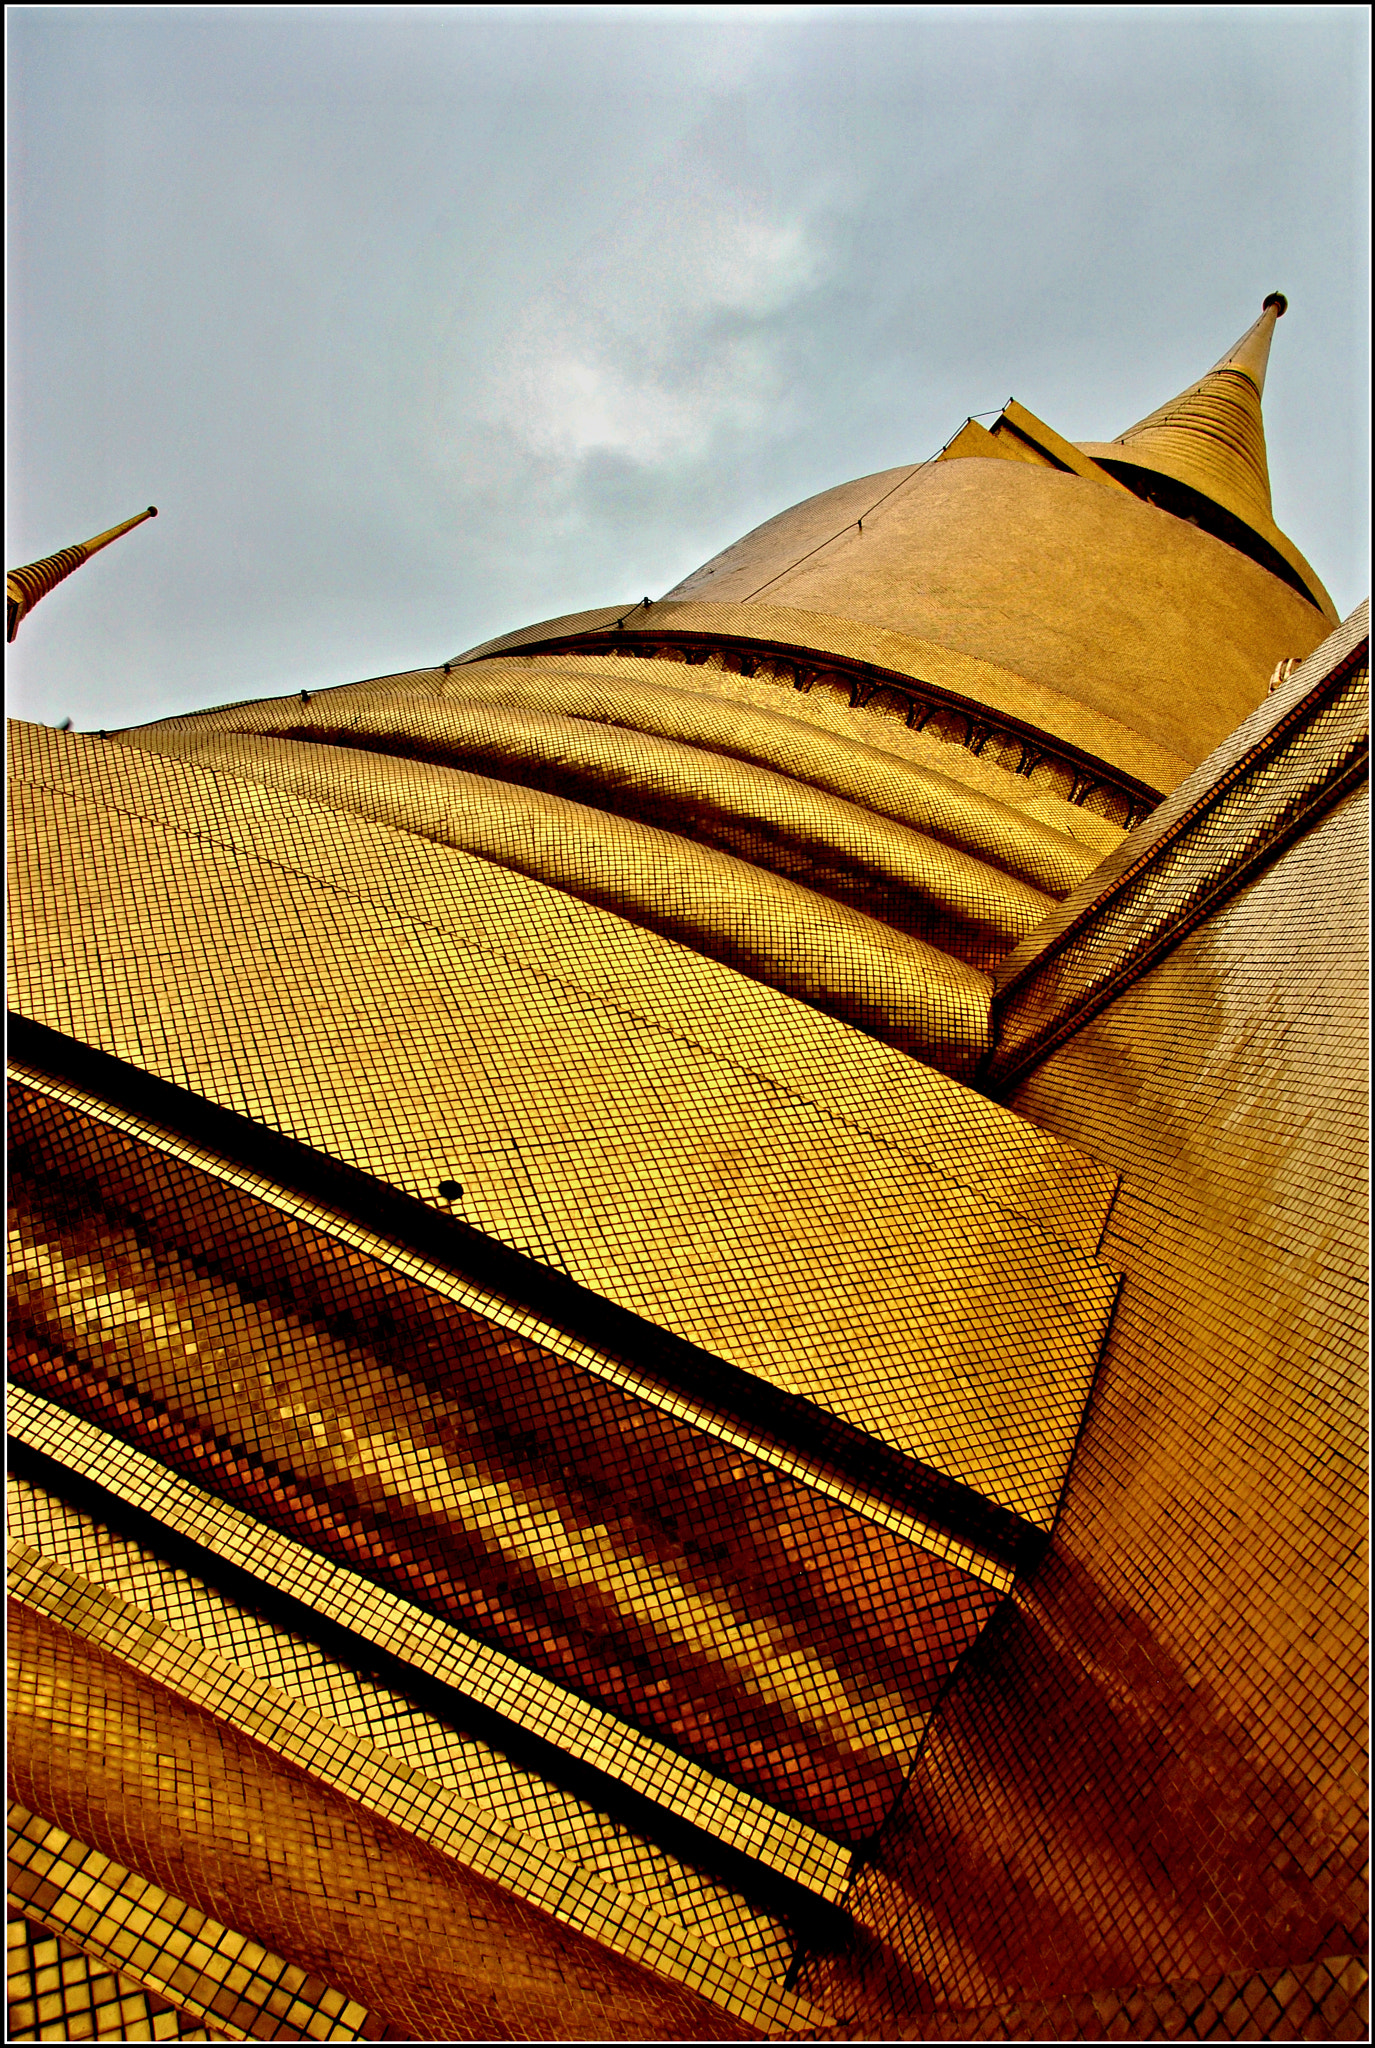 Nikon D3000 + Nikon AF-S DX Nikkor 18-200mm F3.5-5.6G ED VR II sample photo. A different perspective of the golden pagoda photography